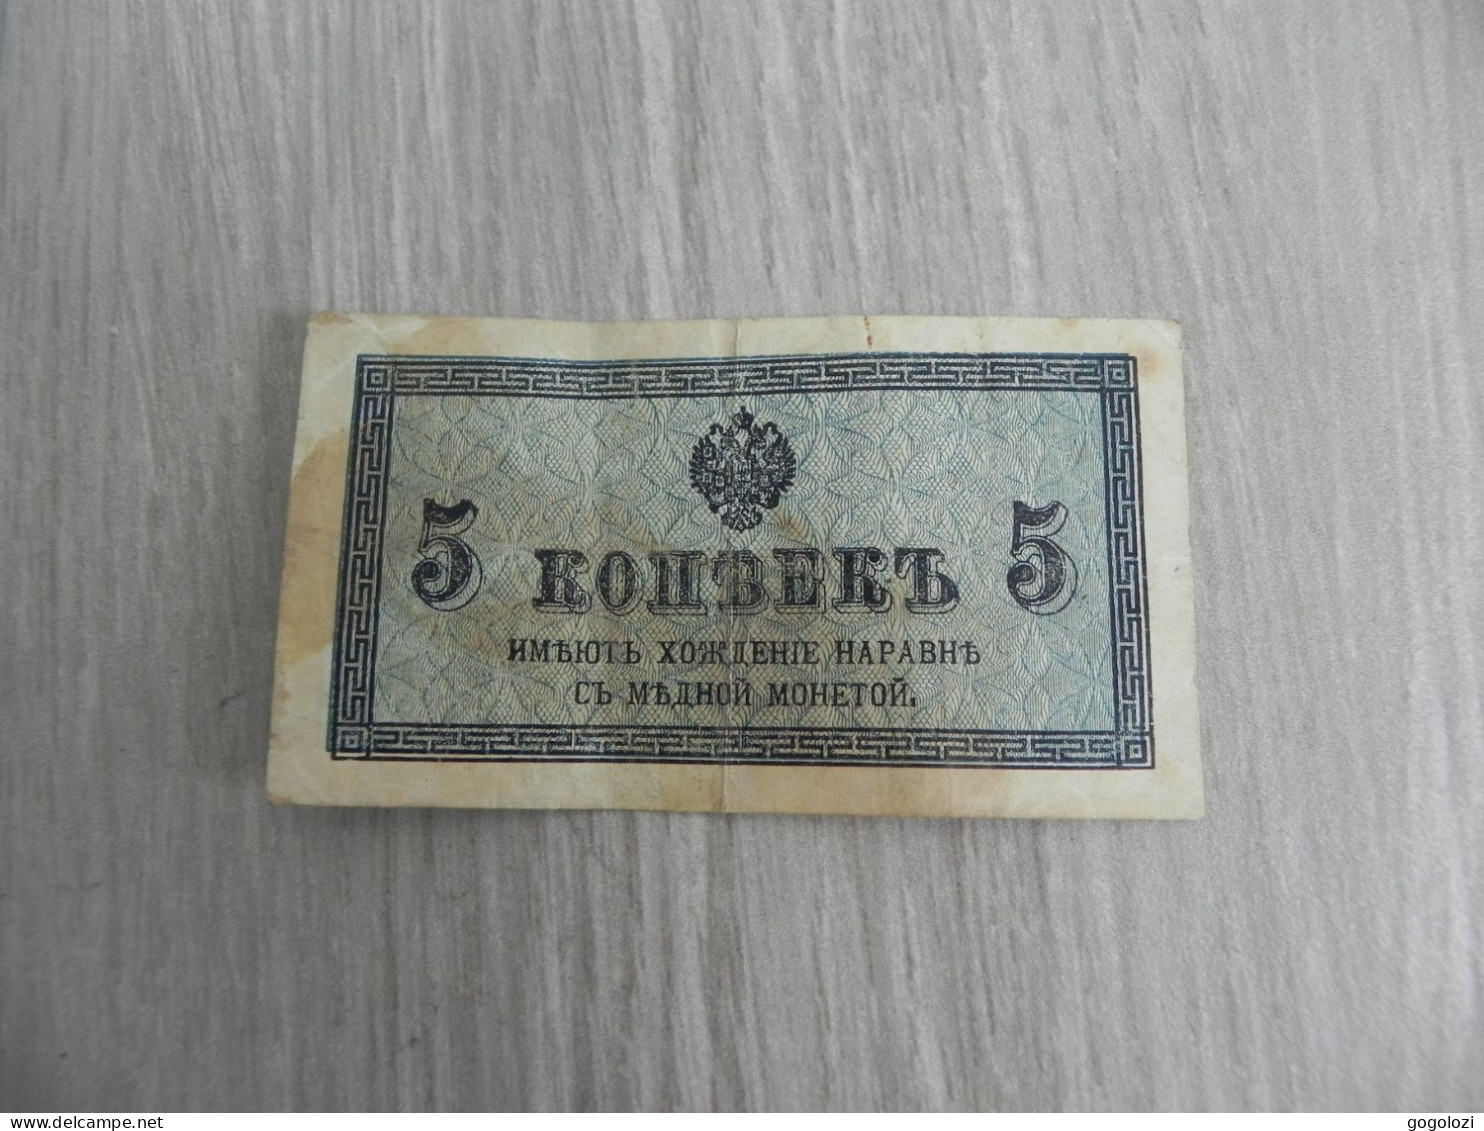 Russia 5 Roubles ND - Rusia